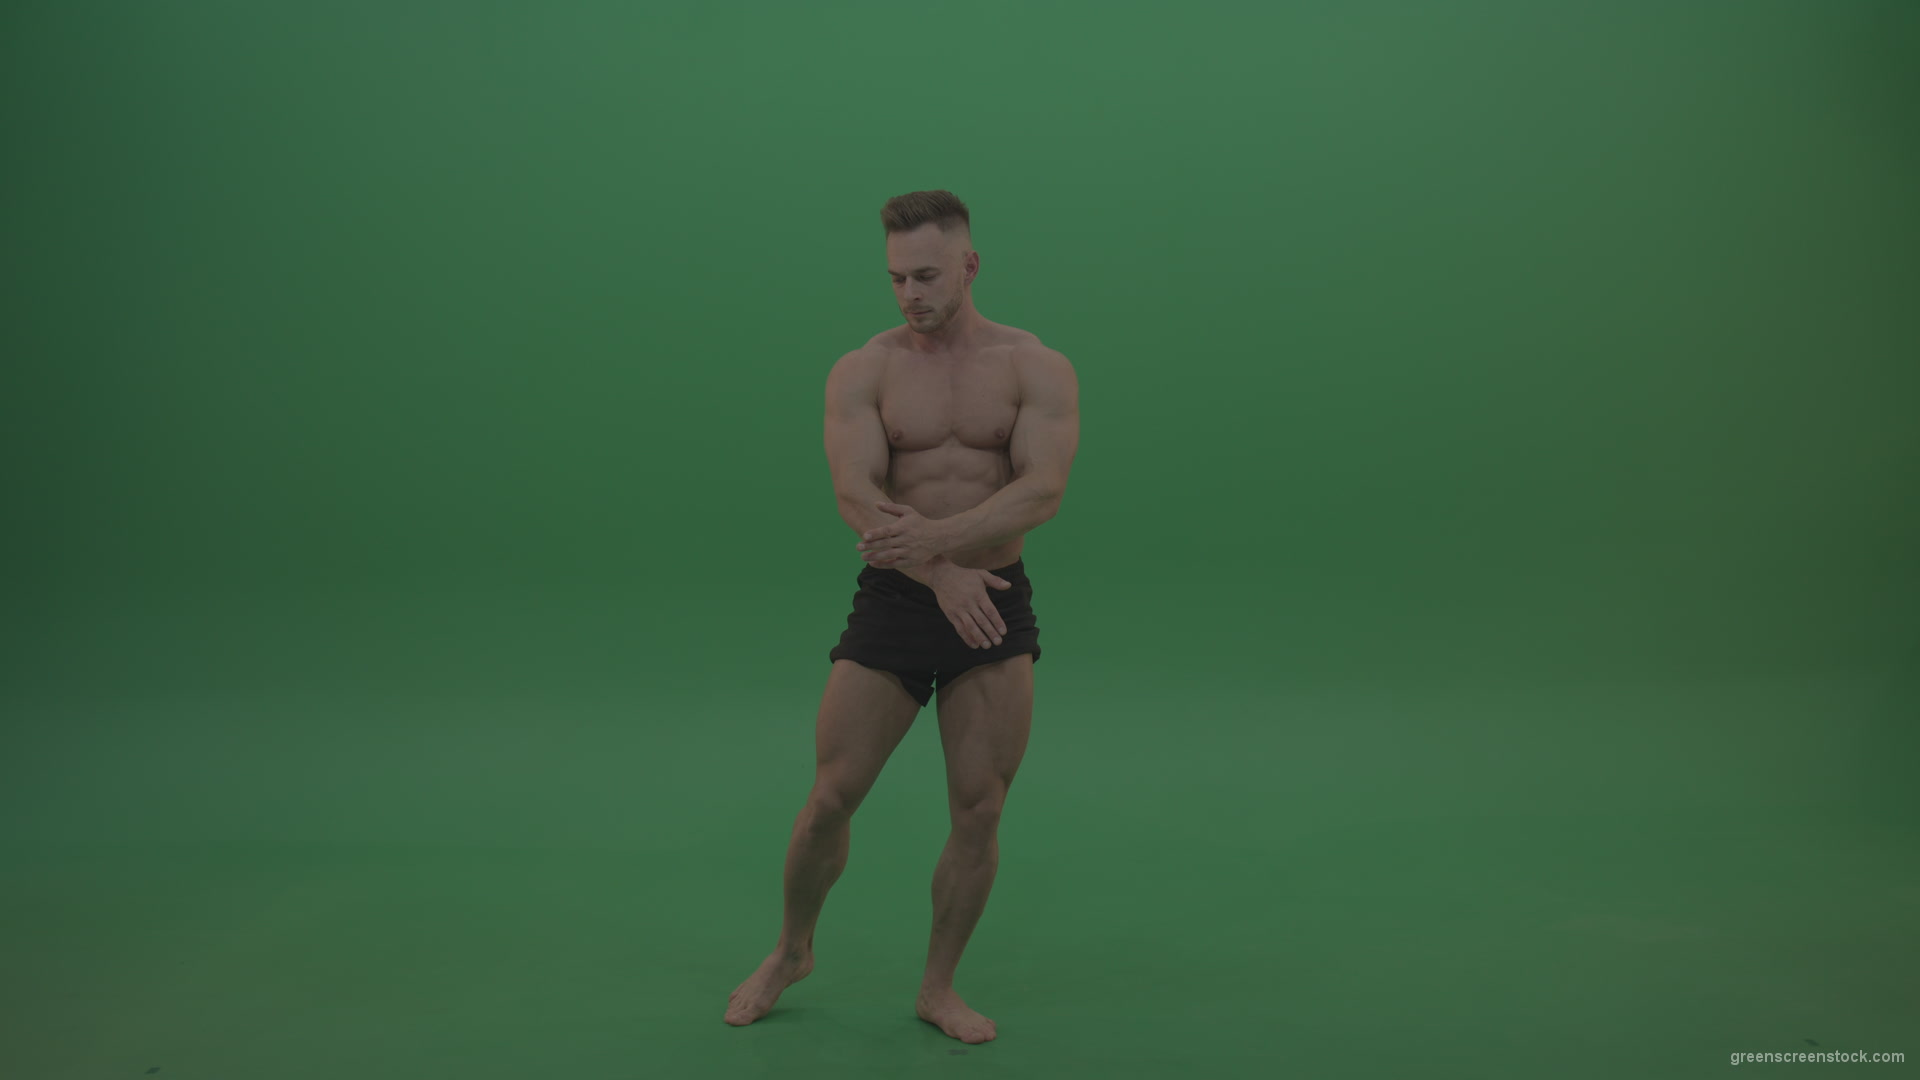 Young_Sportsman_Showing_Front_Double_Biceps_And_Thigh_Muscles_Bodybuilding_Positions_On_Gren_Screen_Wall_Background_002 Green Screen Stock